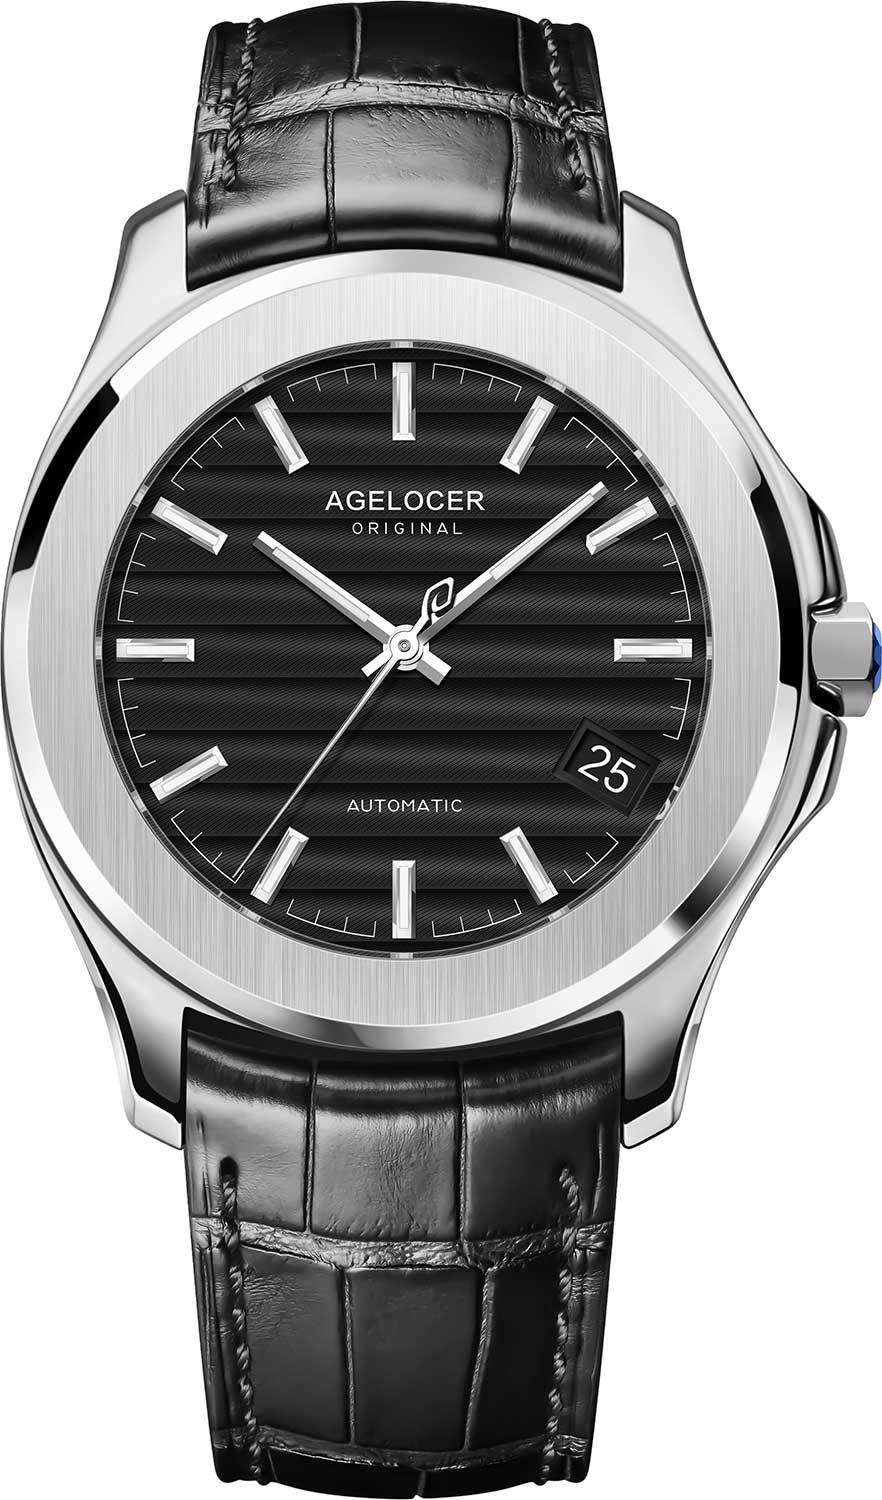    AGELOCER 6302A1